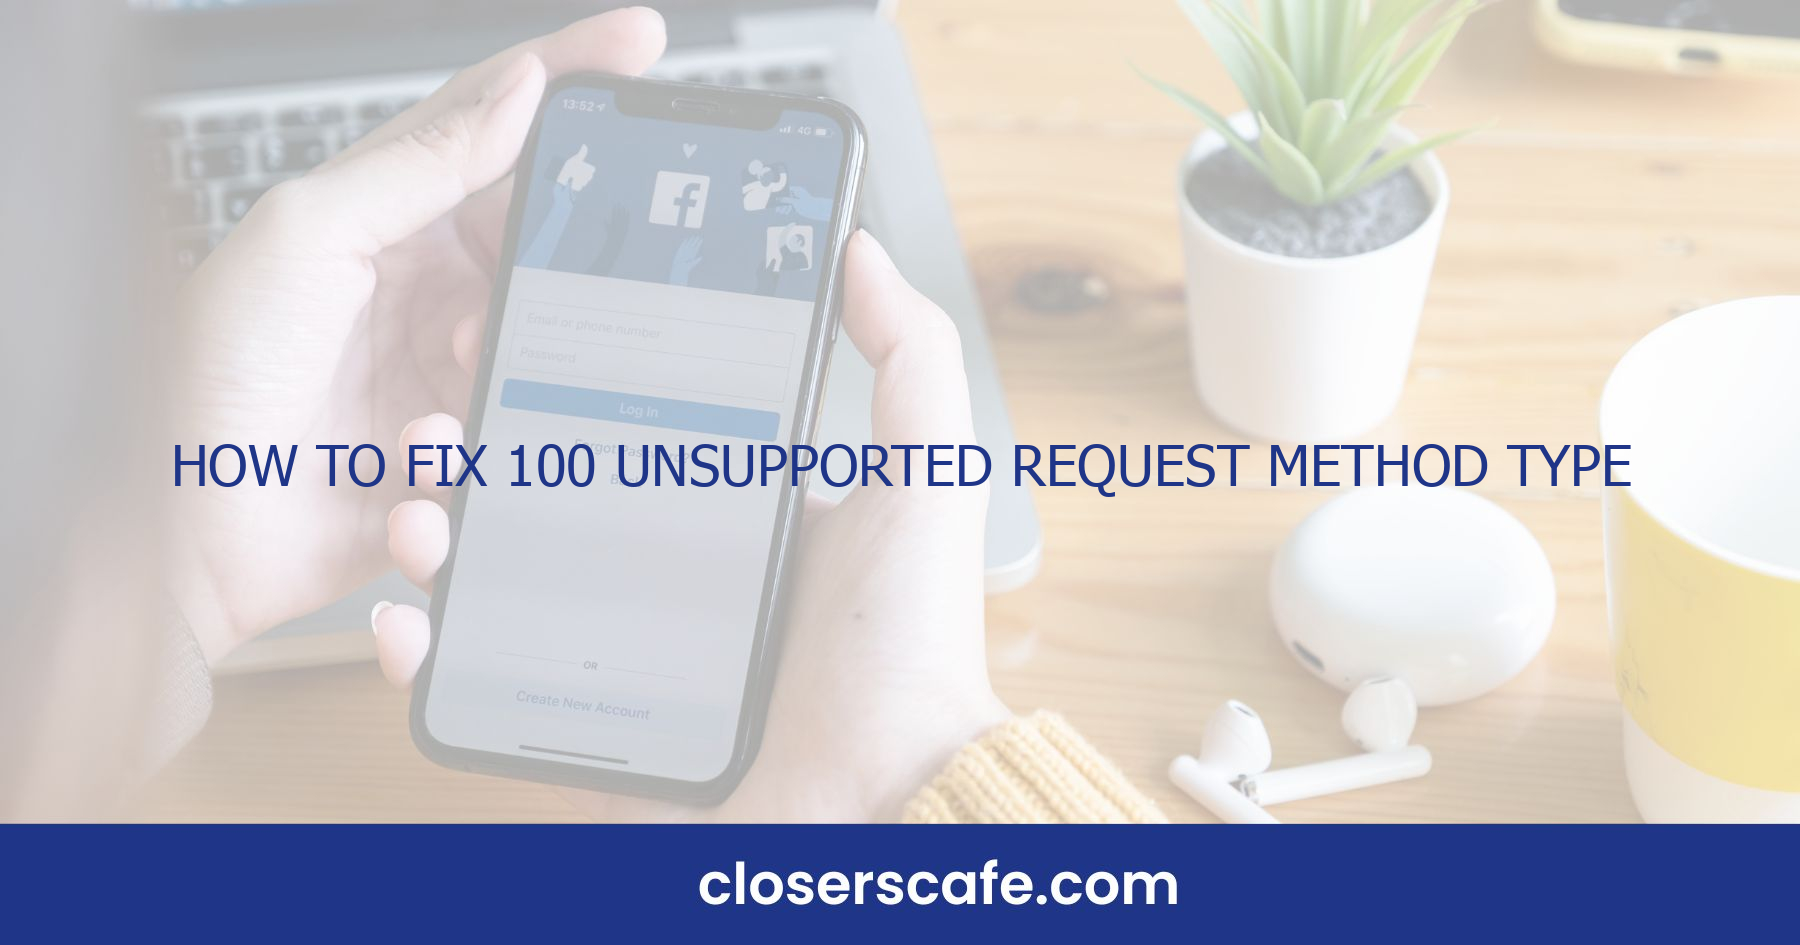 How To Fix 100 Unsupported Request Method Type Post On Facebook